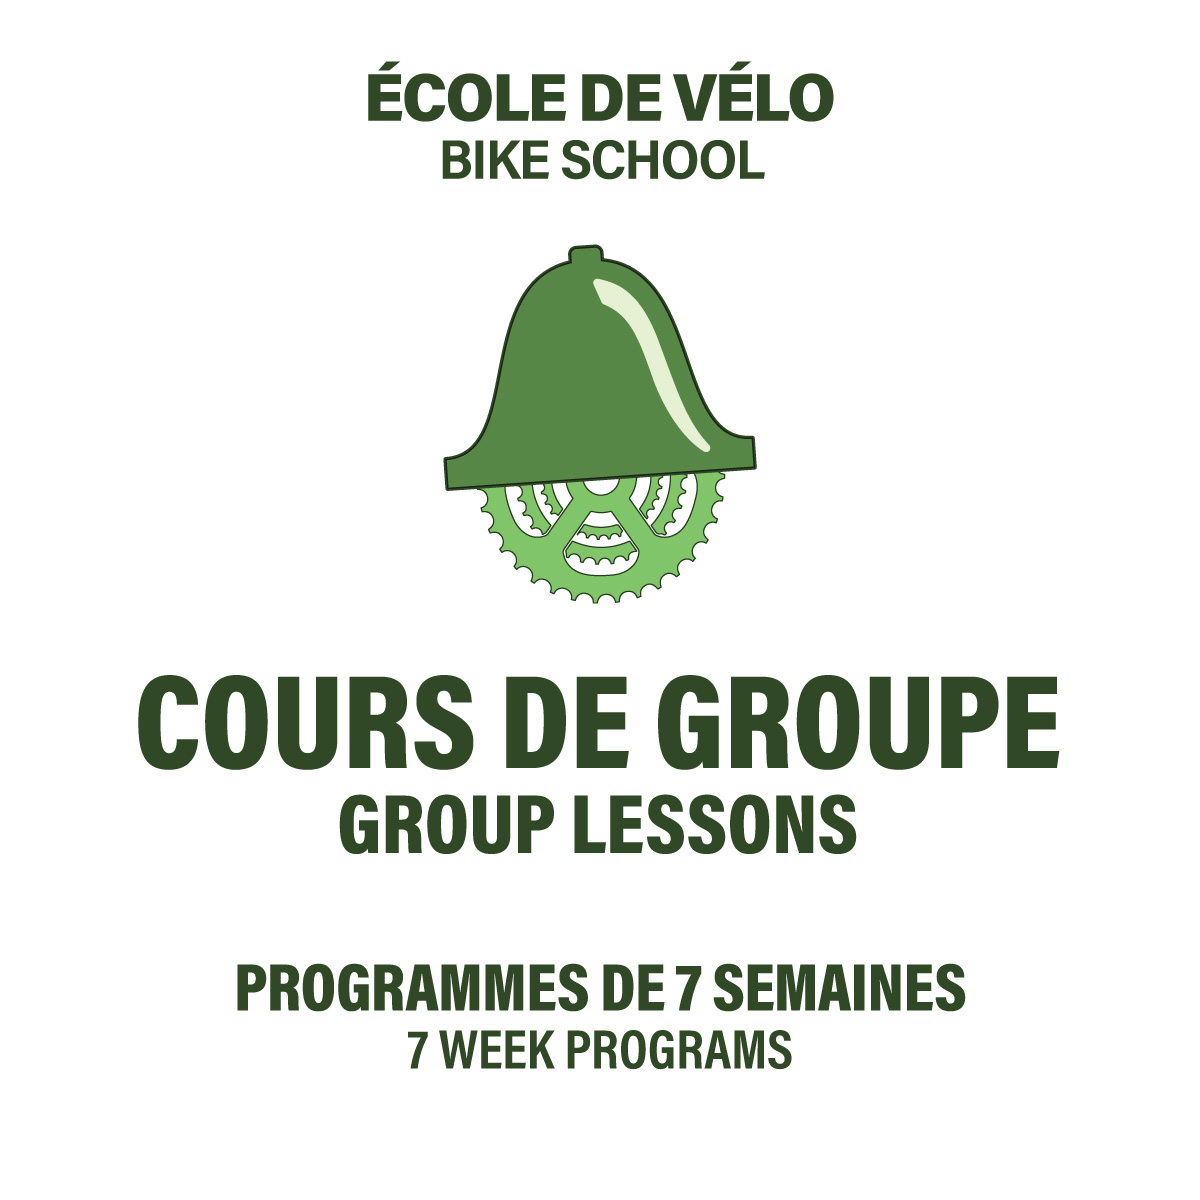 Group lessons (7 weeks)